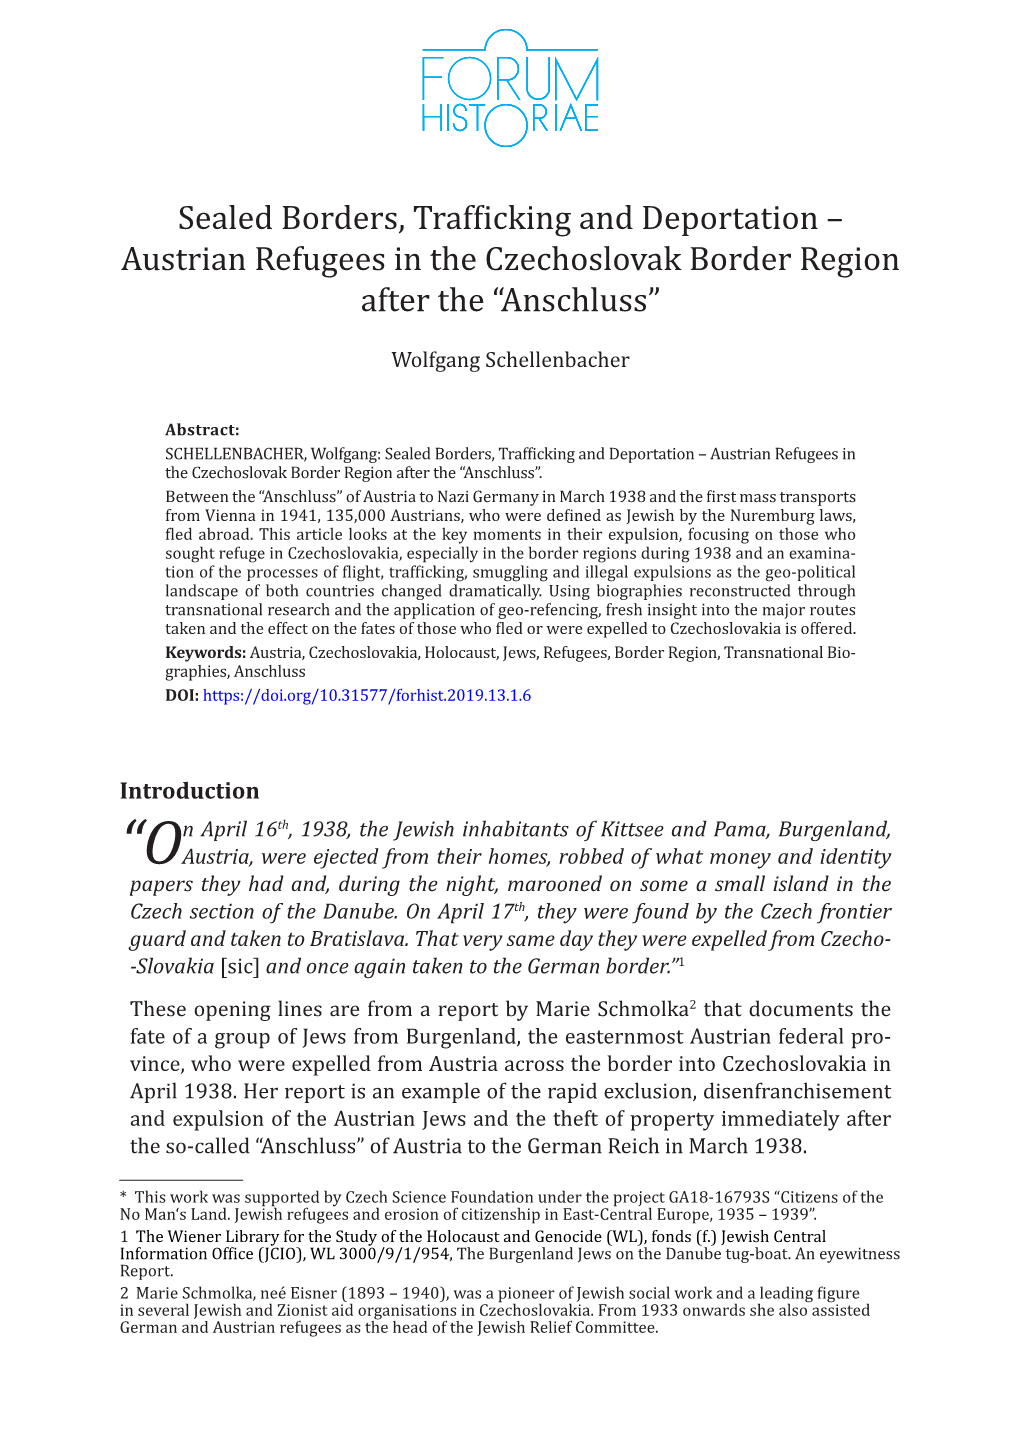 Sealed Borders, Trafficking and Deportation – Austrian Refugees in the Czechoslovak Border Region After the “Anschluss” Wolfgang Schellenbacher Abstract